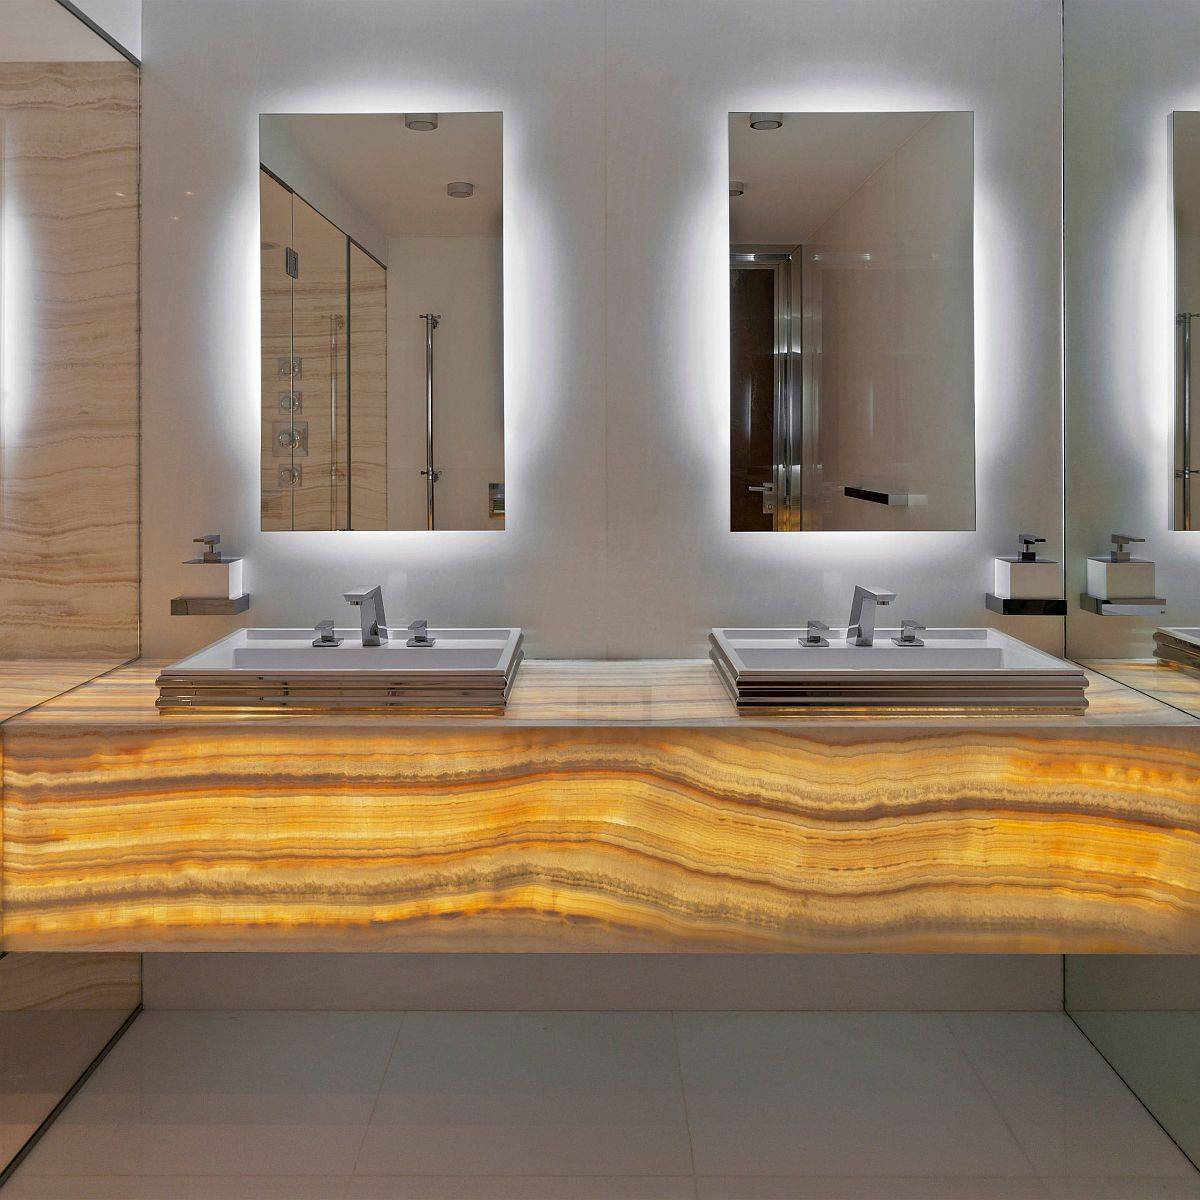 Luxurious-bathroom-with-back-lit-onyx-countertops-and-mirrors-71355